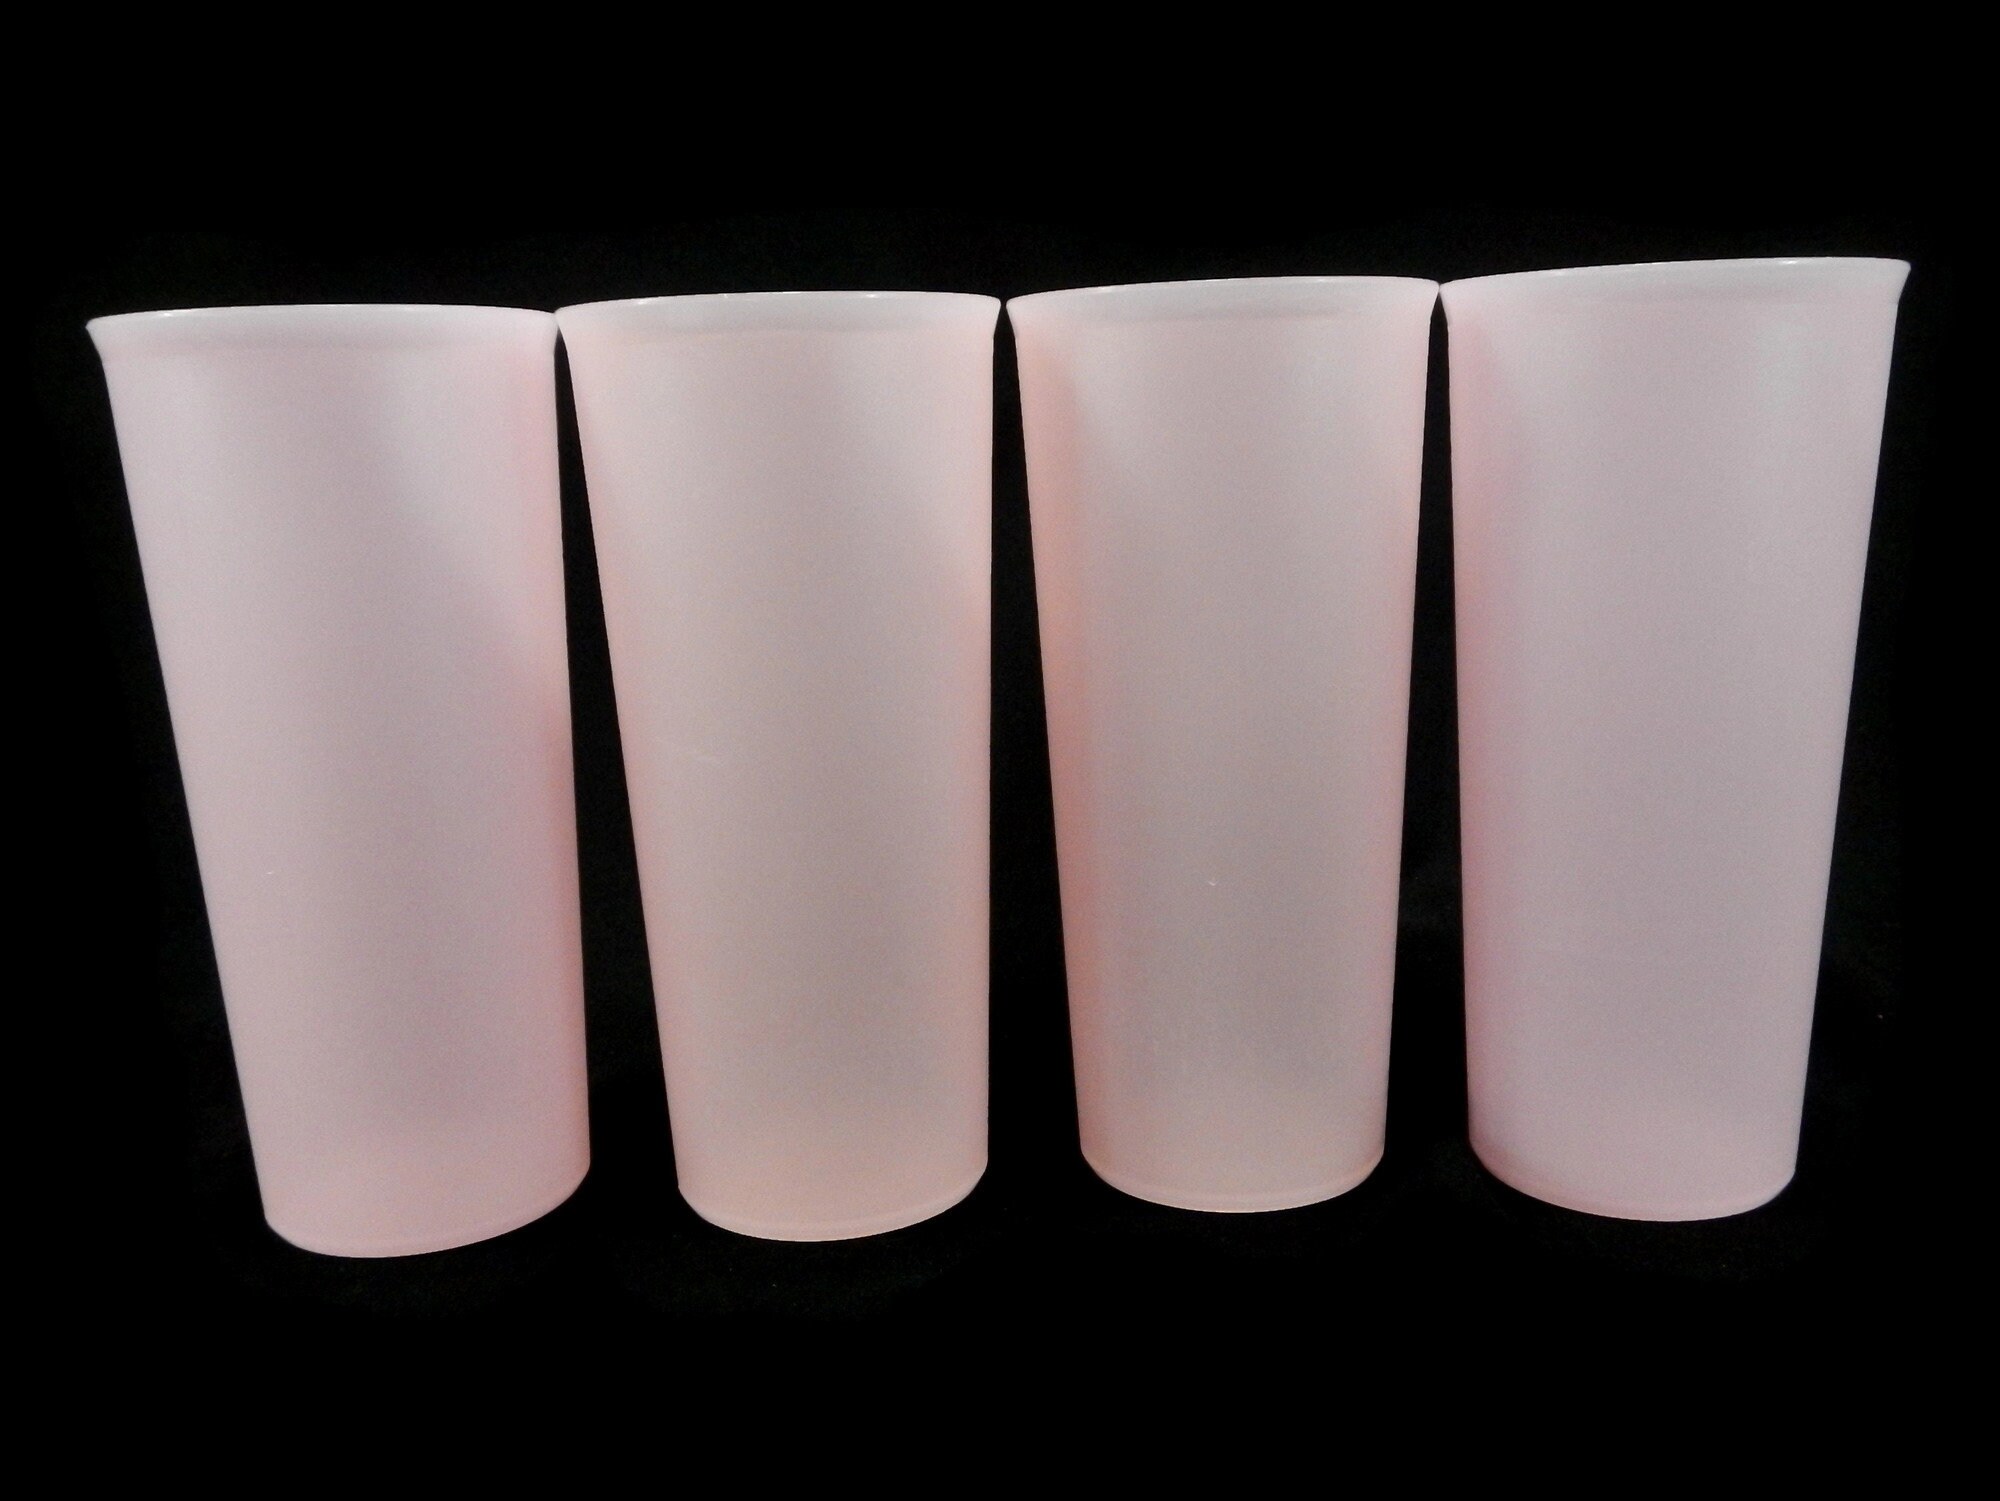 Vintage Tupperware Measuring 4 Cups With Flip up Pour Lid, Preowned, 70s  Era. 